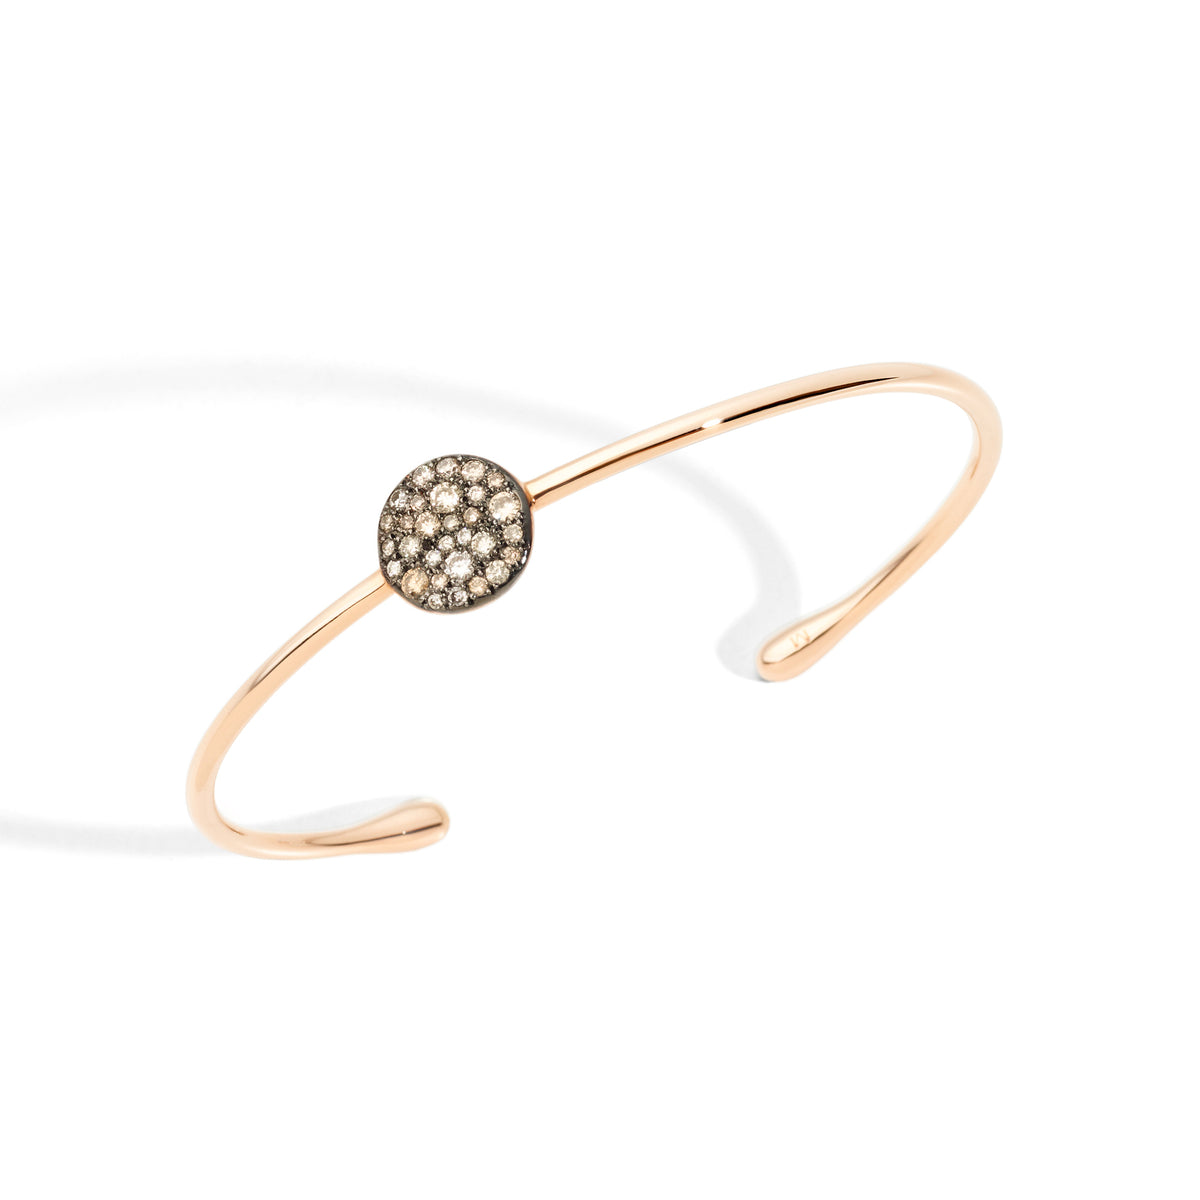 Sabbia Bangle in 18k Rose Gold with Pave Brown Diamonds - Orsini Jewellers NZ